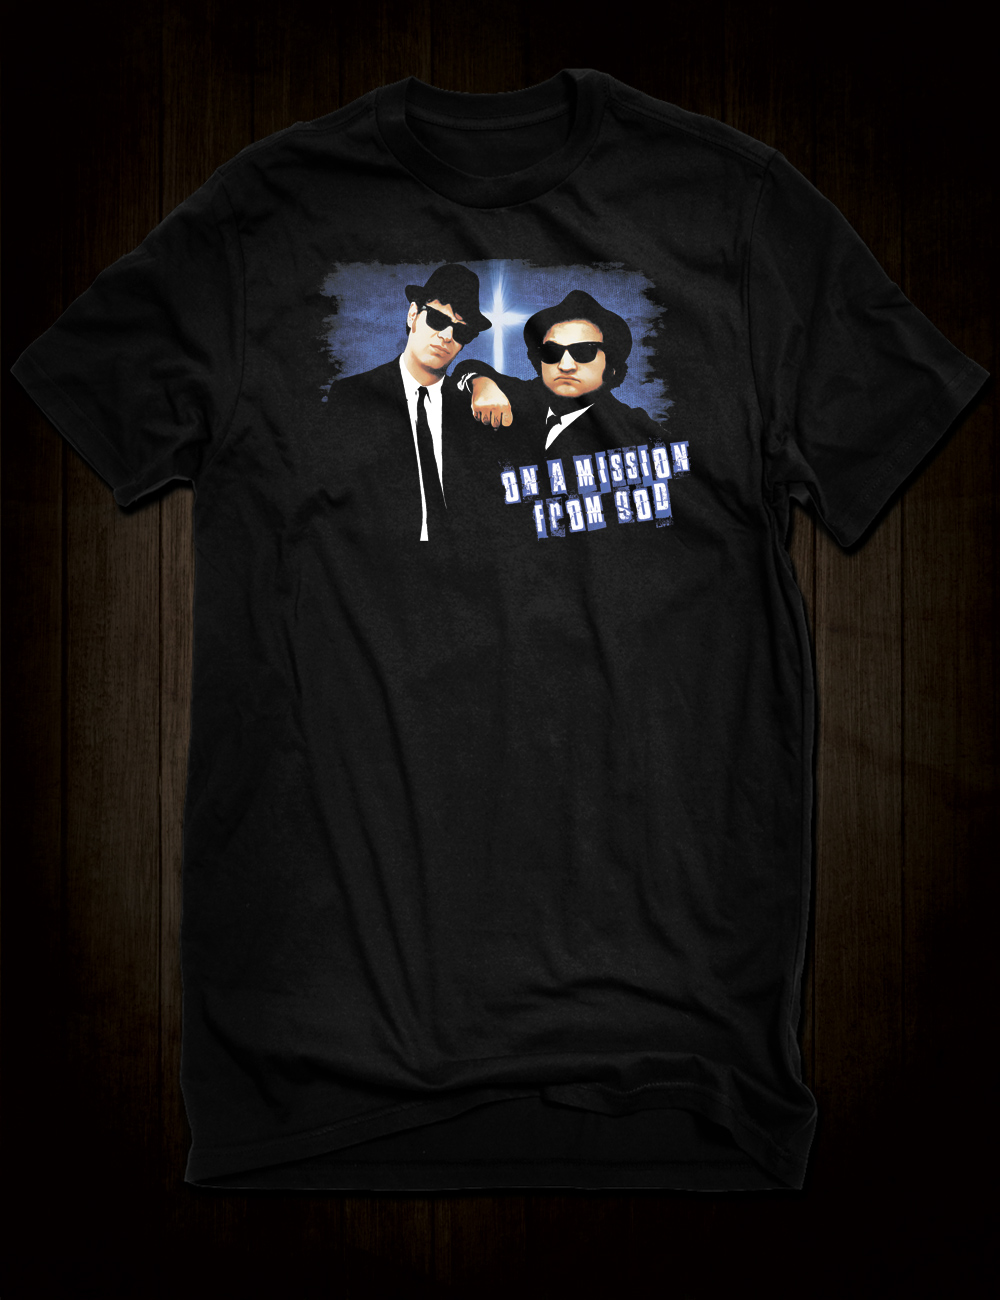 The Blues Brothers T-Shirt